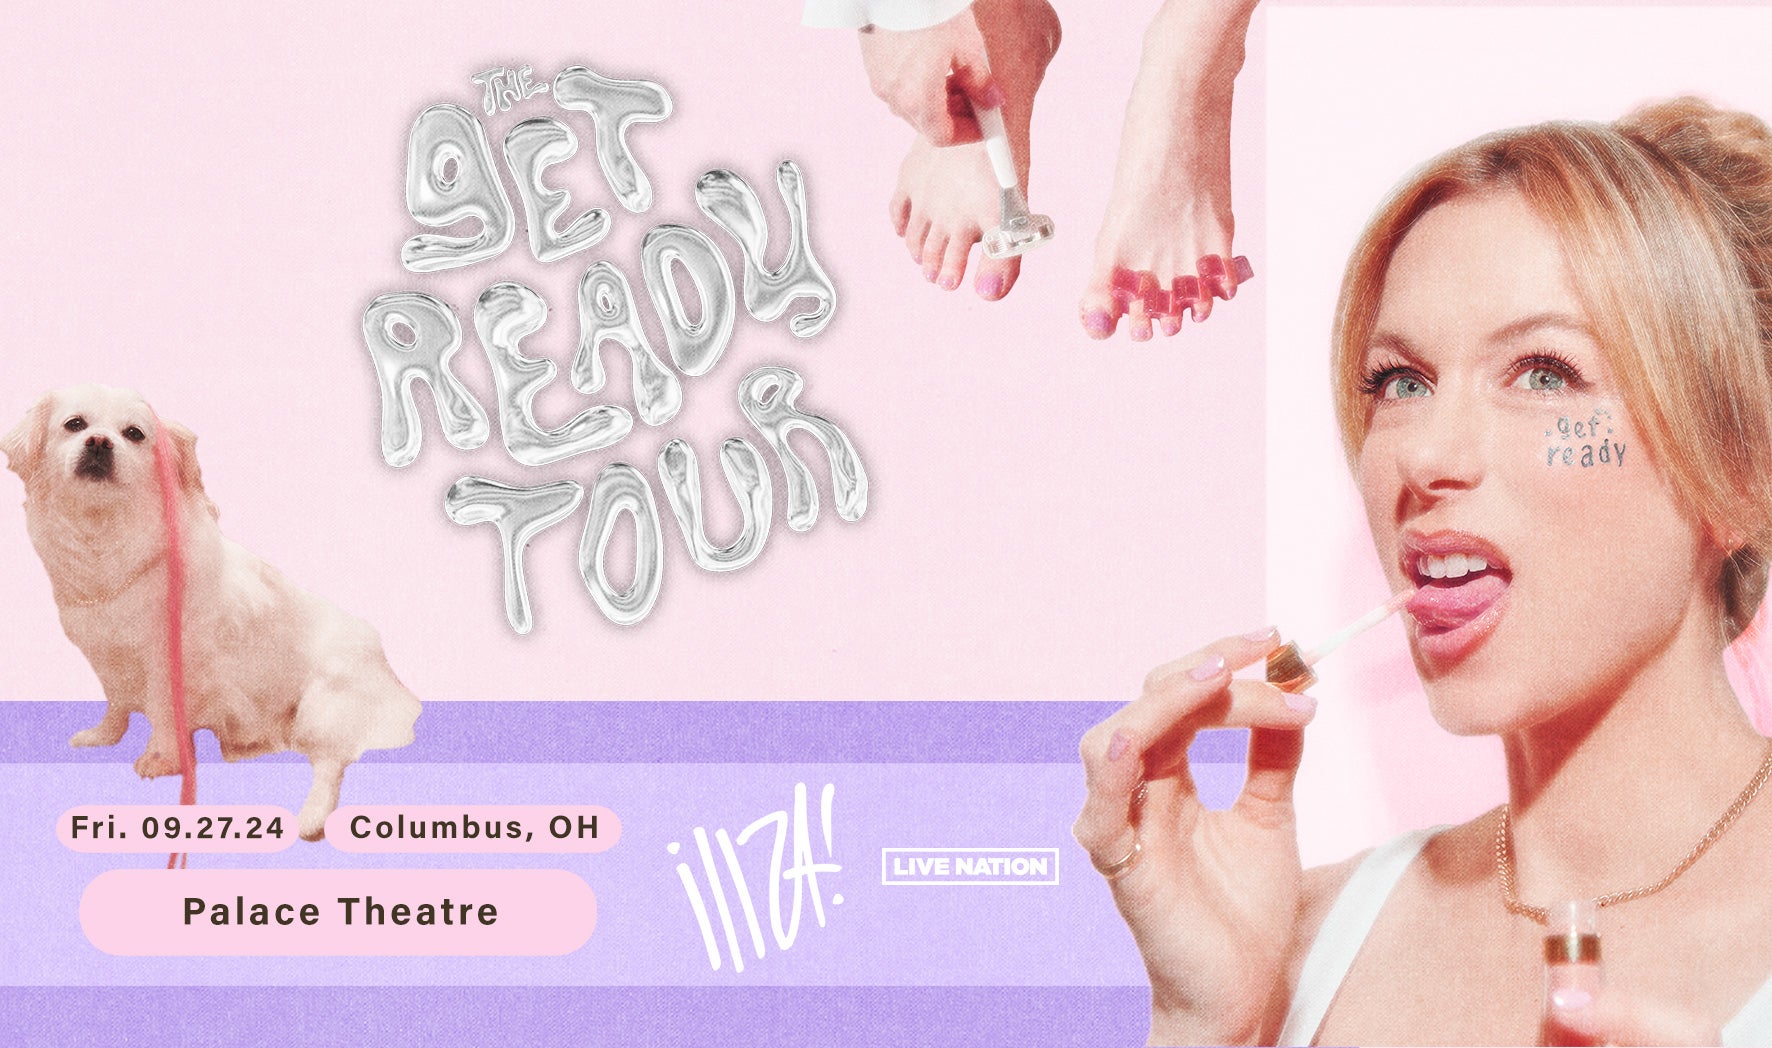 More Info for Iliza: The Get Ready Tour